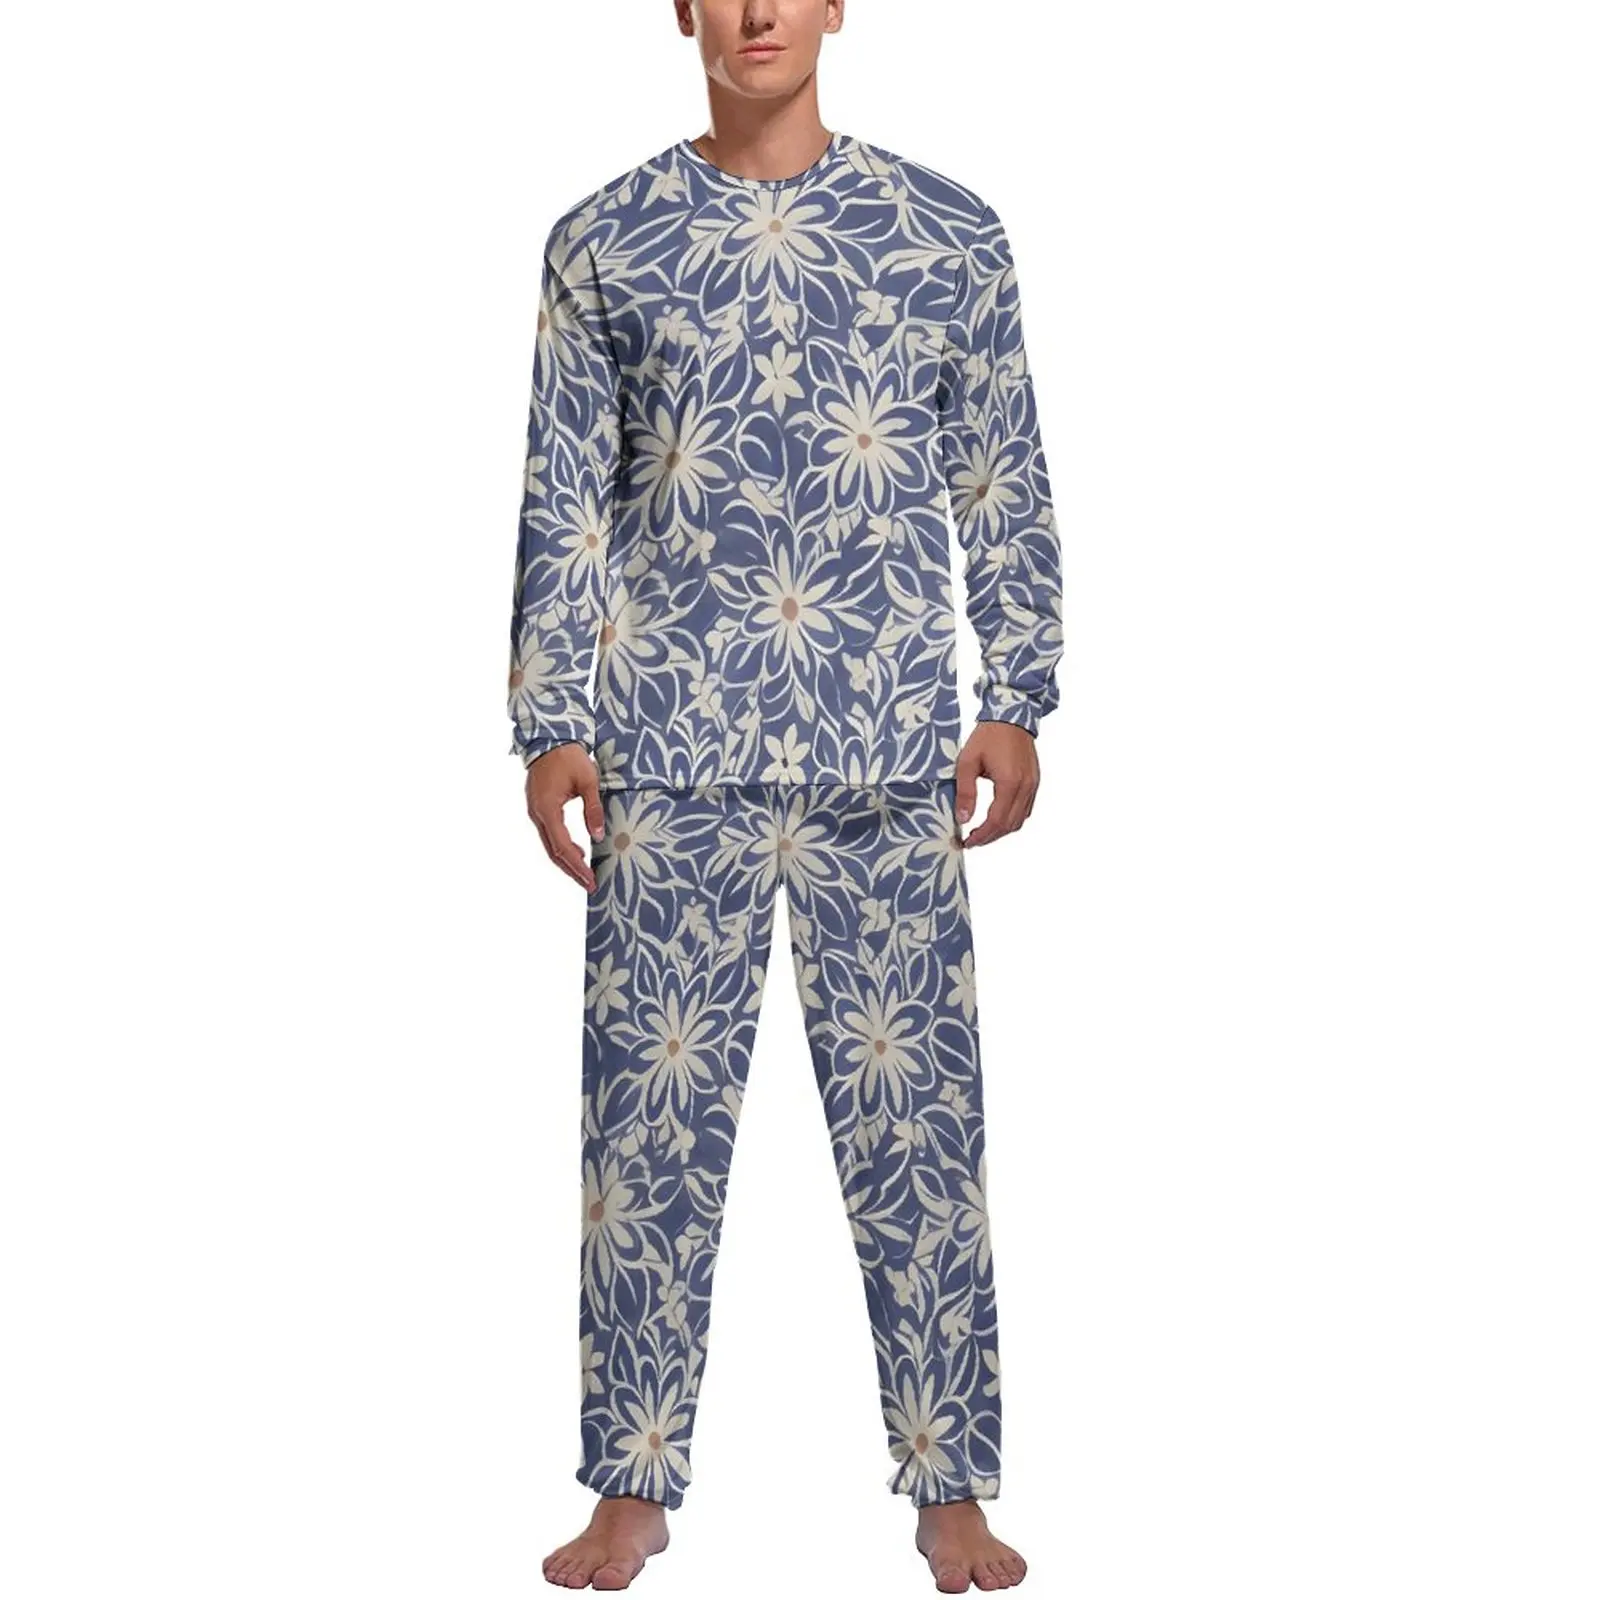 

Retro Floral Pajamas Spring Two Piece Ditsy Print Soft Pajama Sets Male Long Sleeves Aesthetic Design Home Suit